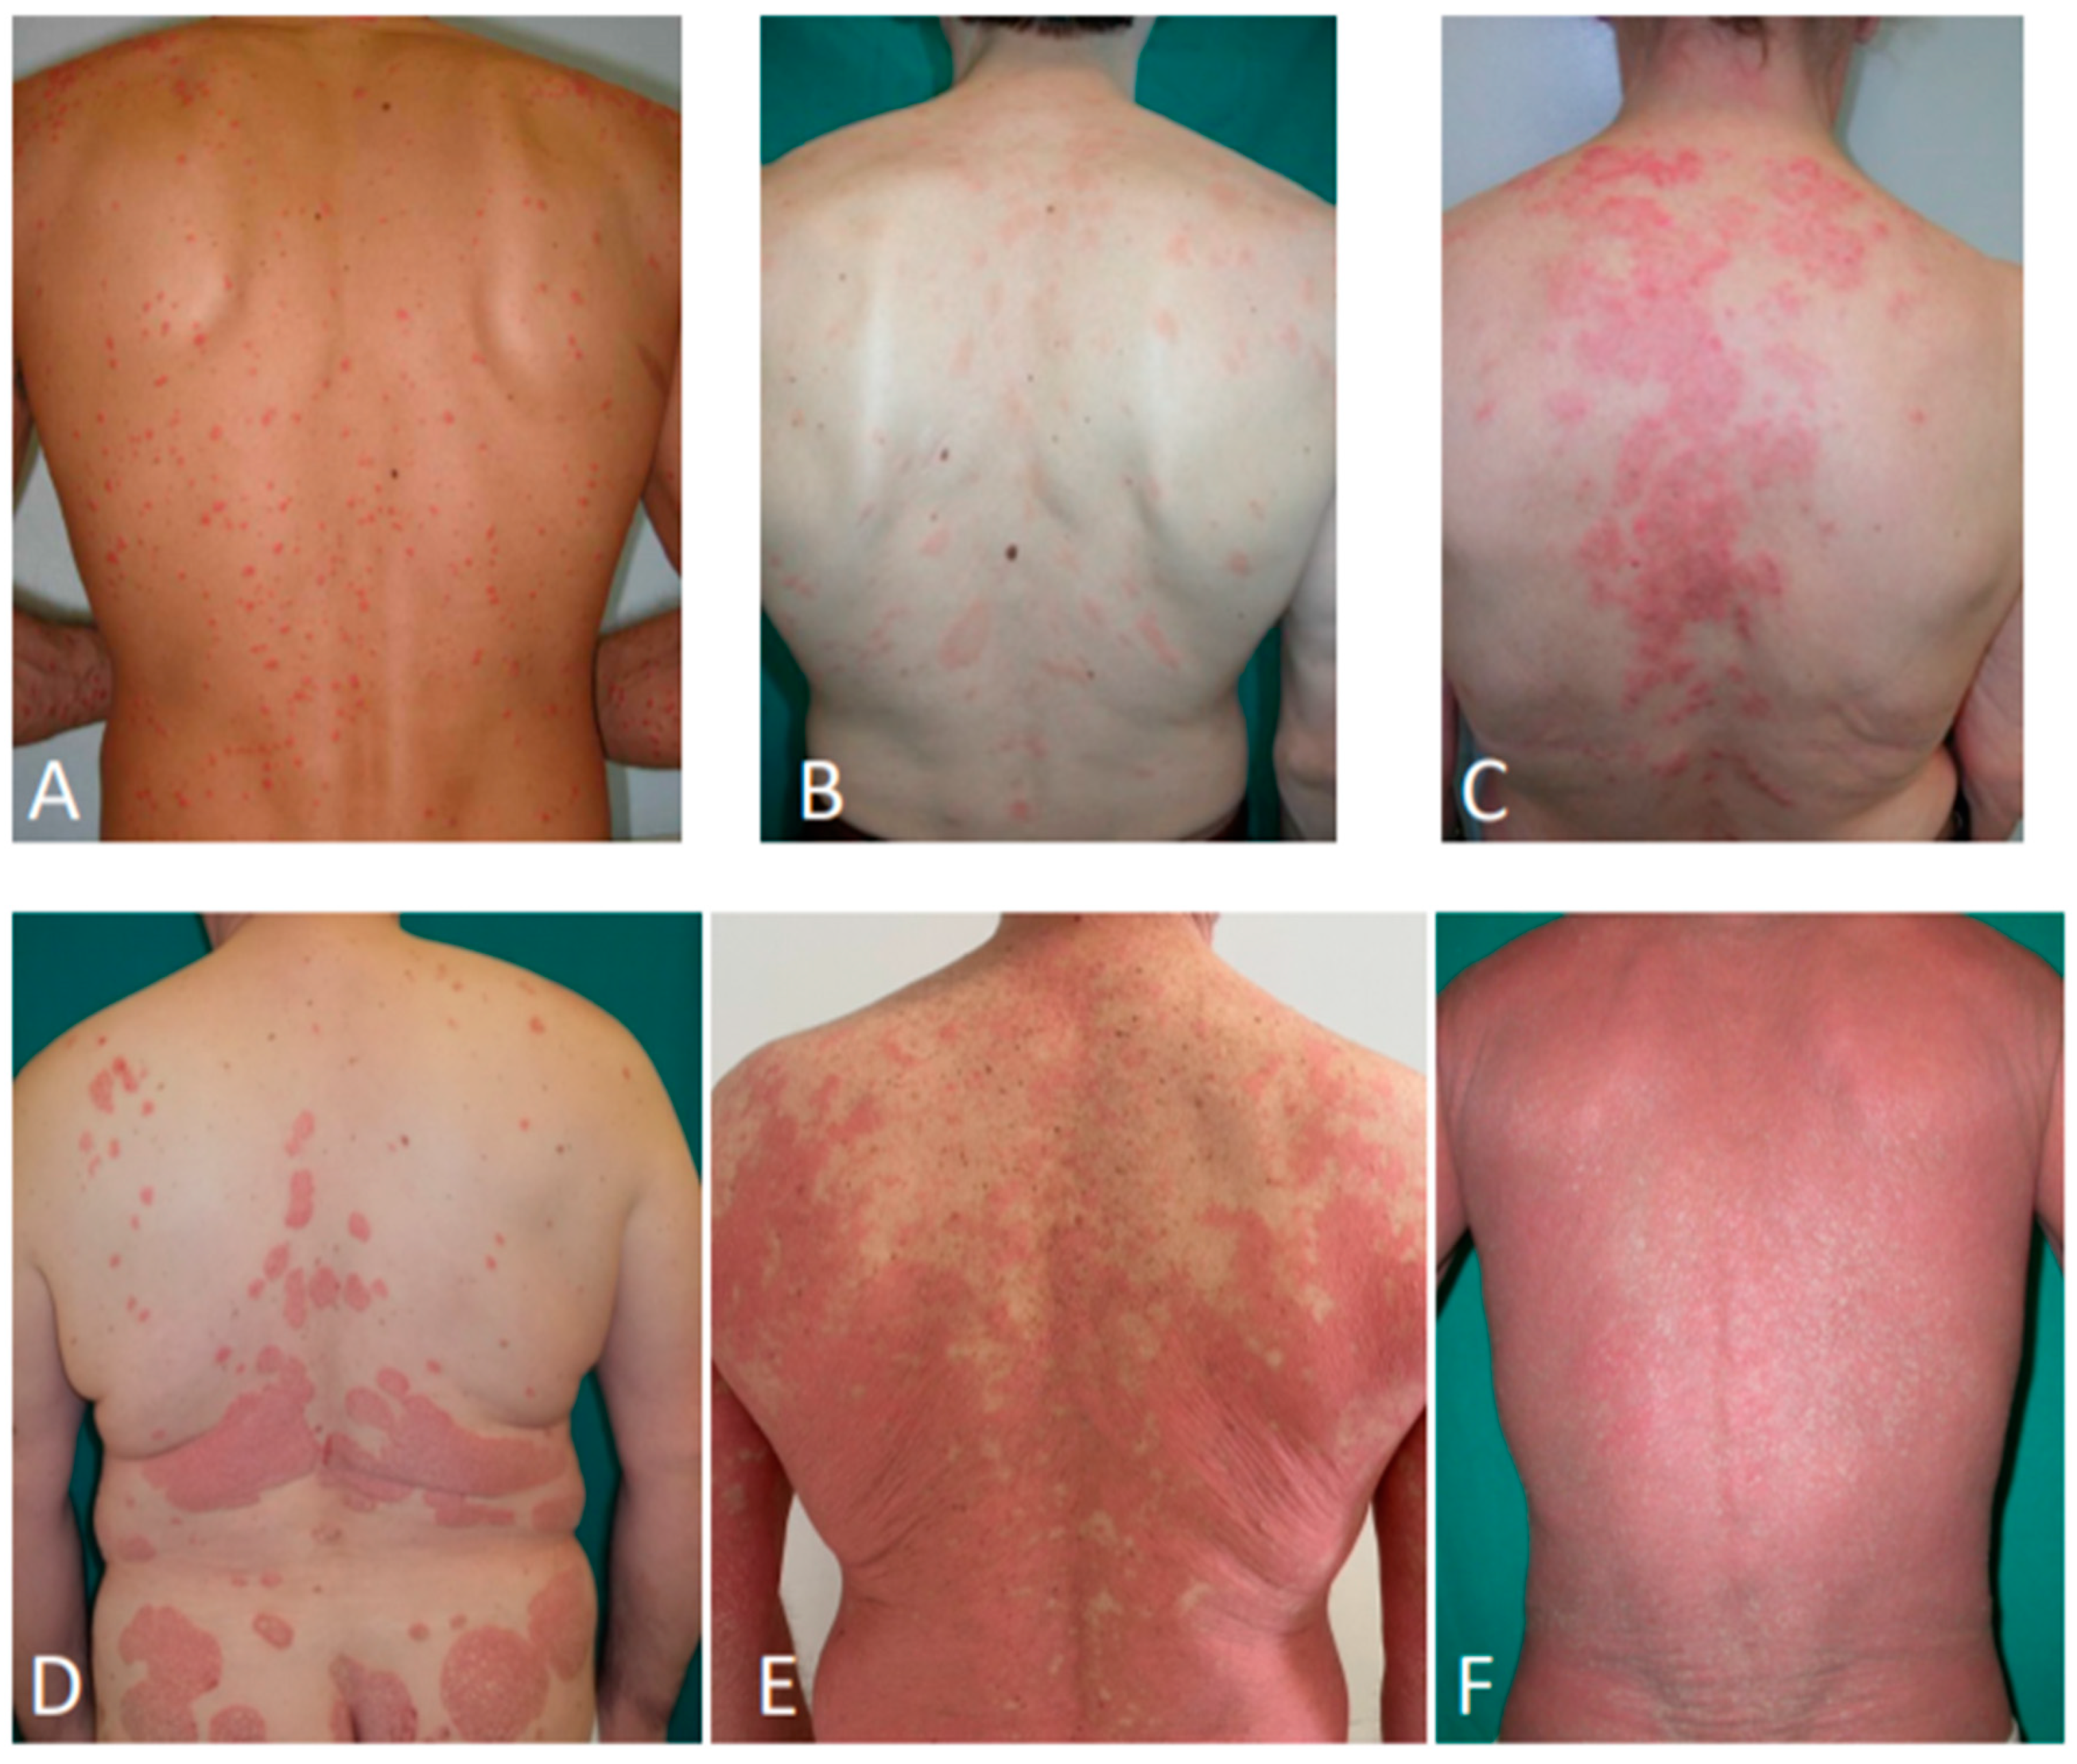 Tinea Capitis Often Overlooked in Adults - Advances in Dermatology